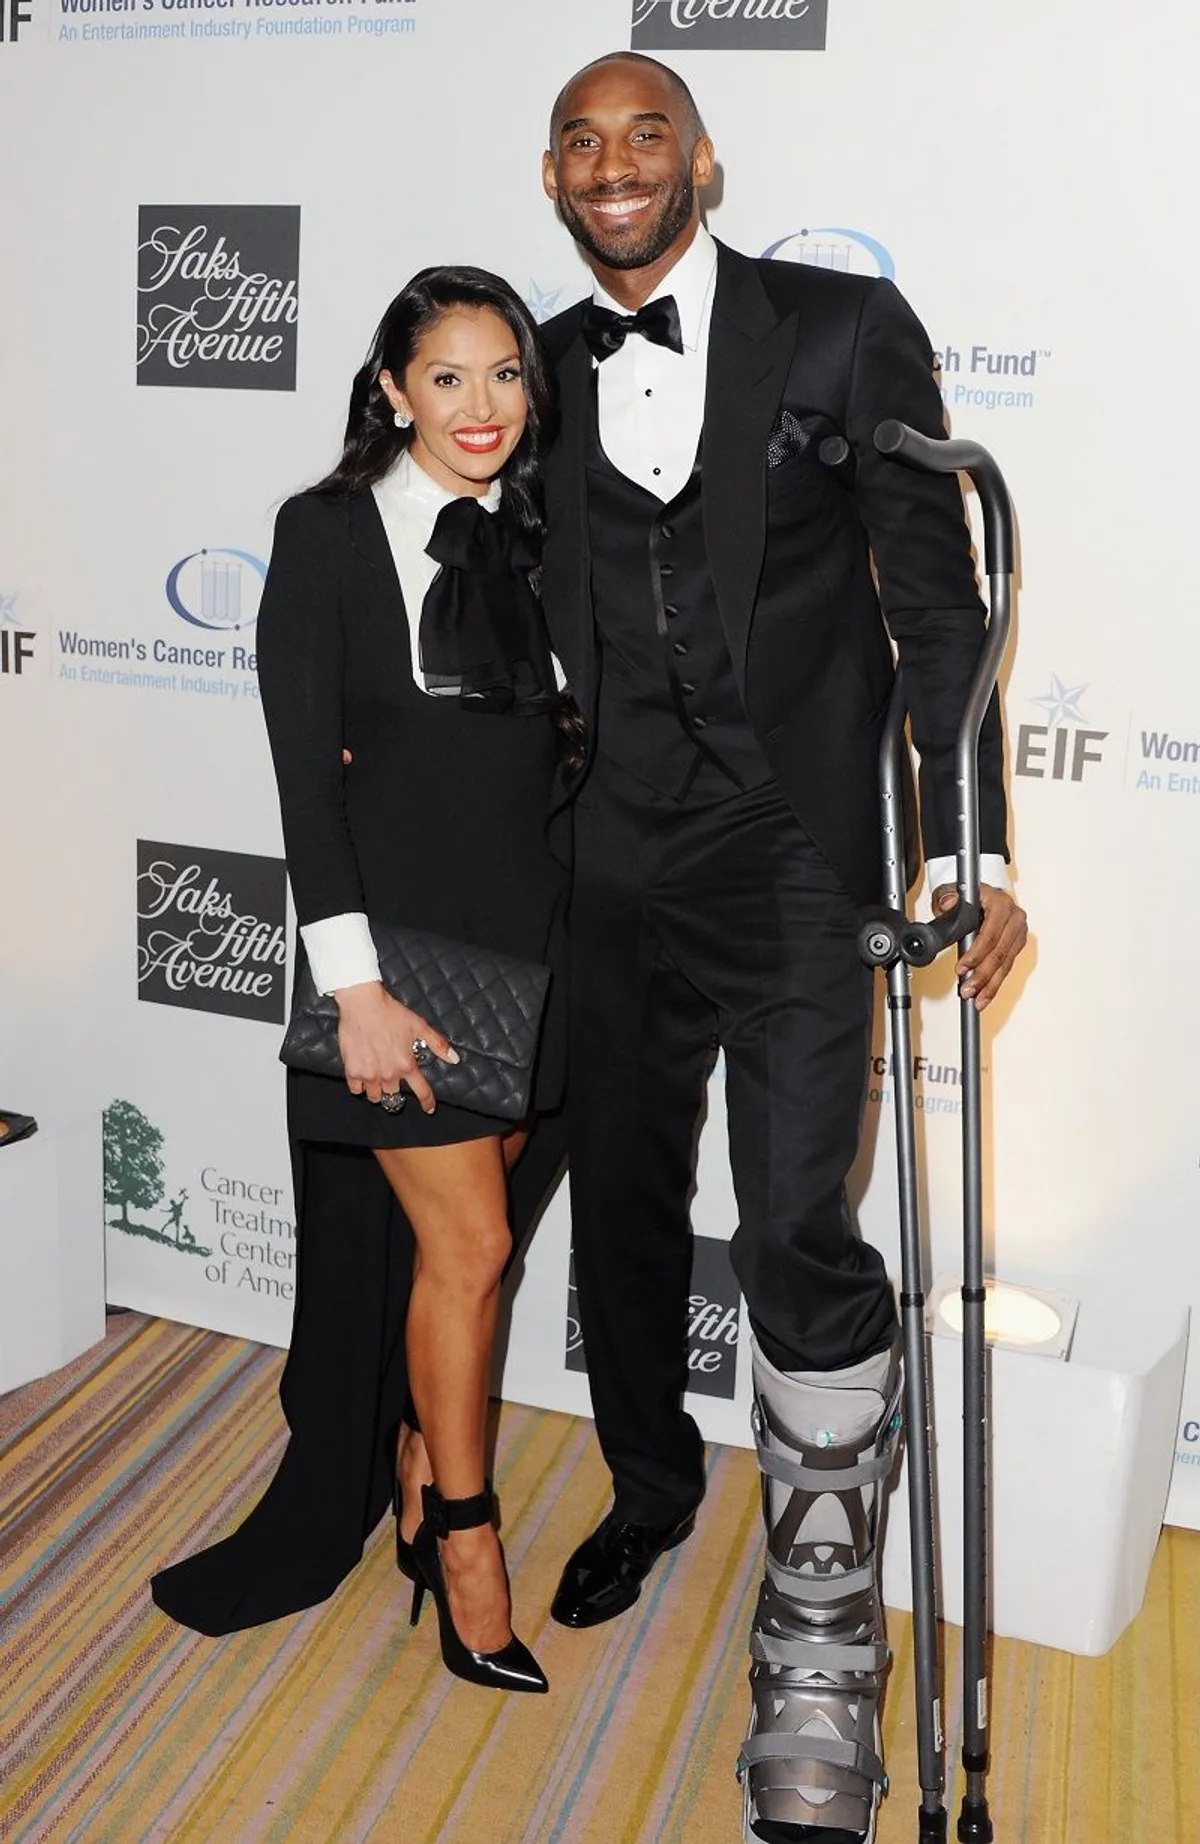 Vanessa and Kobe Bryant attend the "An Unforgettable Evening" of the EIF's Women's Cancer Research Fund at the Beverly Hills, California on May 2, 2013. | Photo: Getty Images